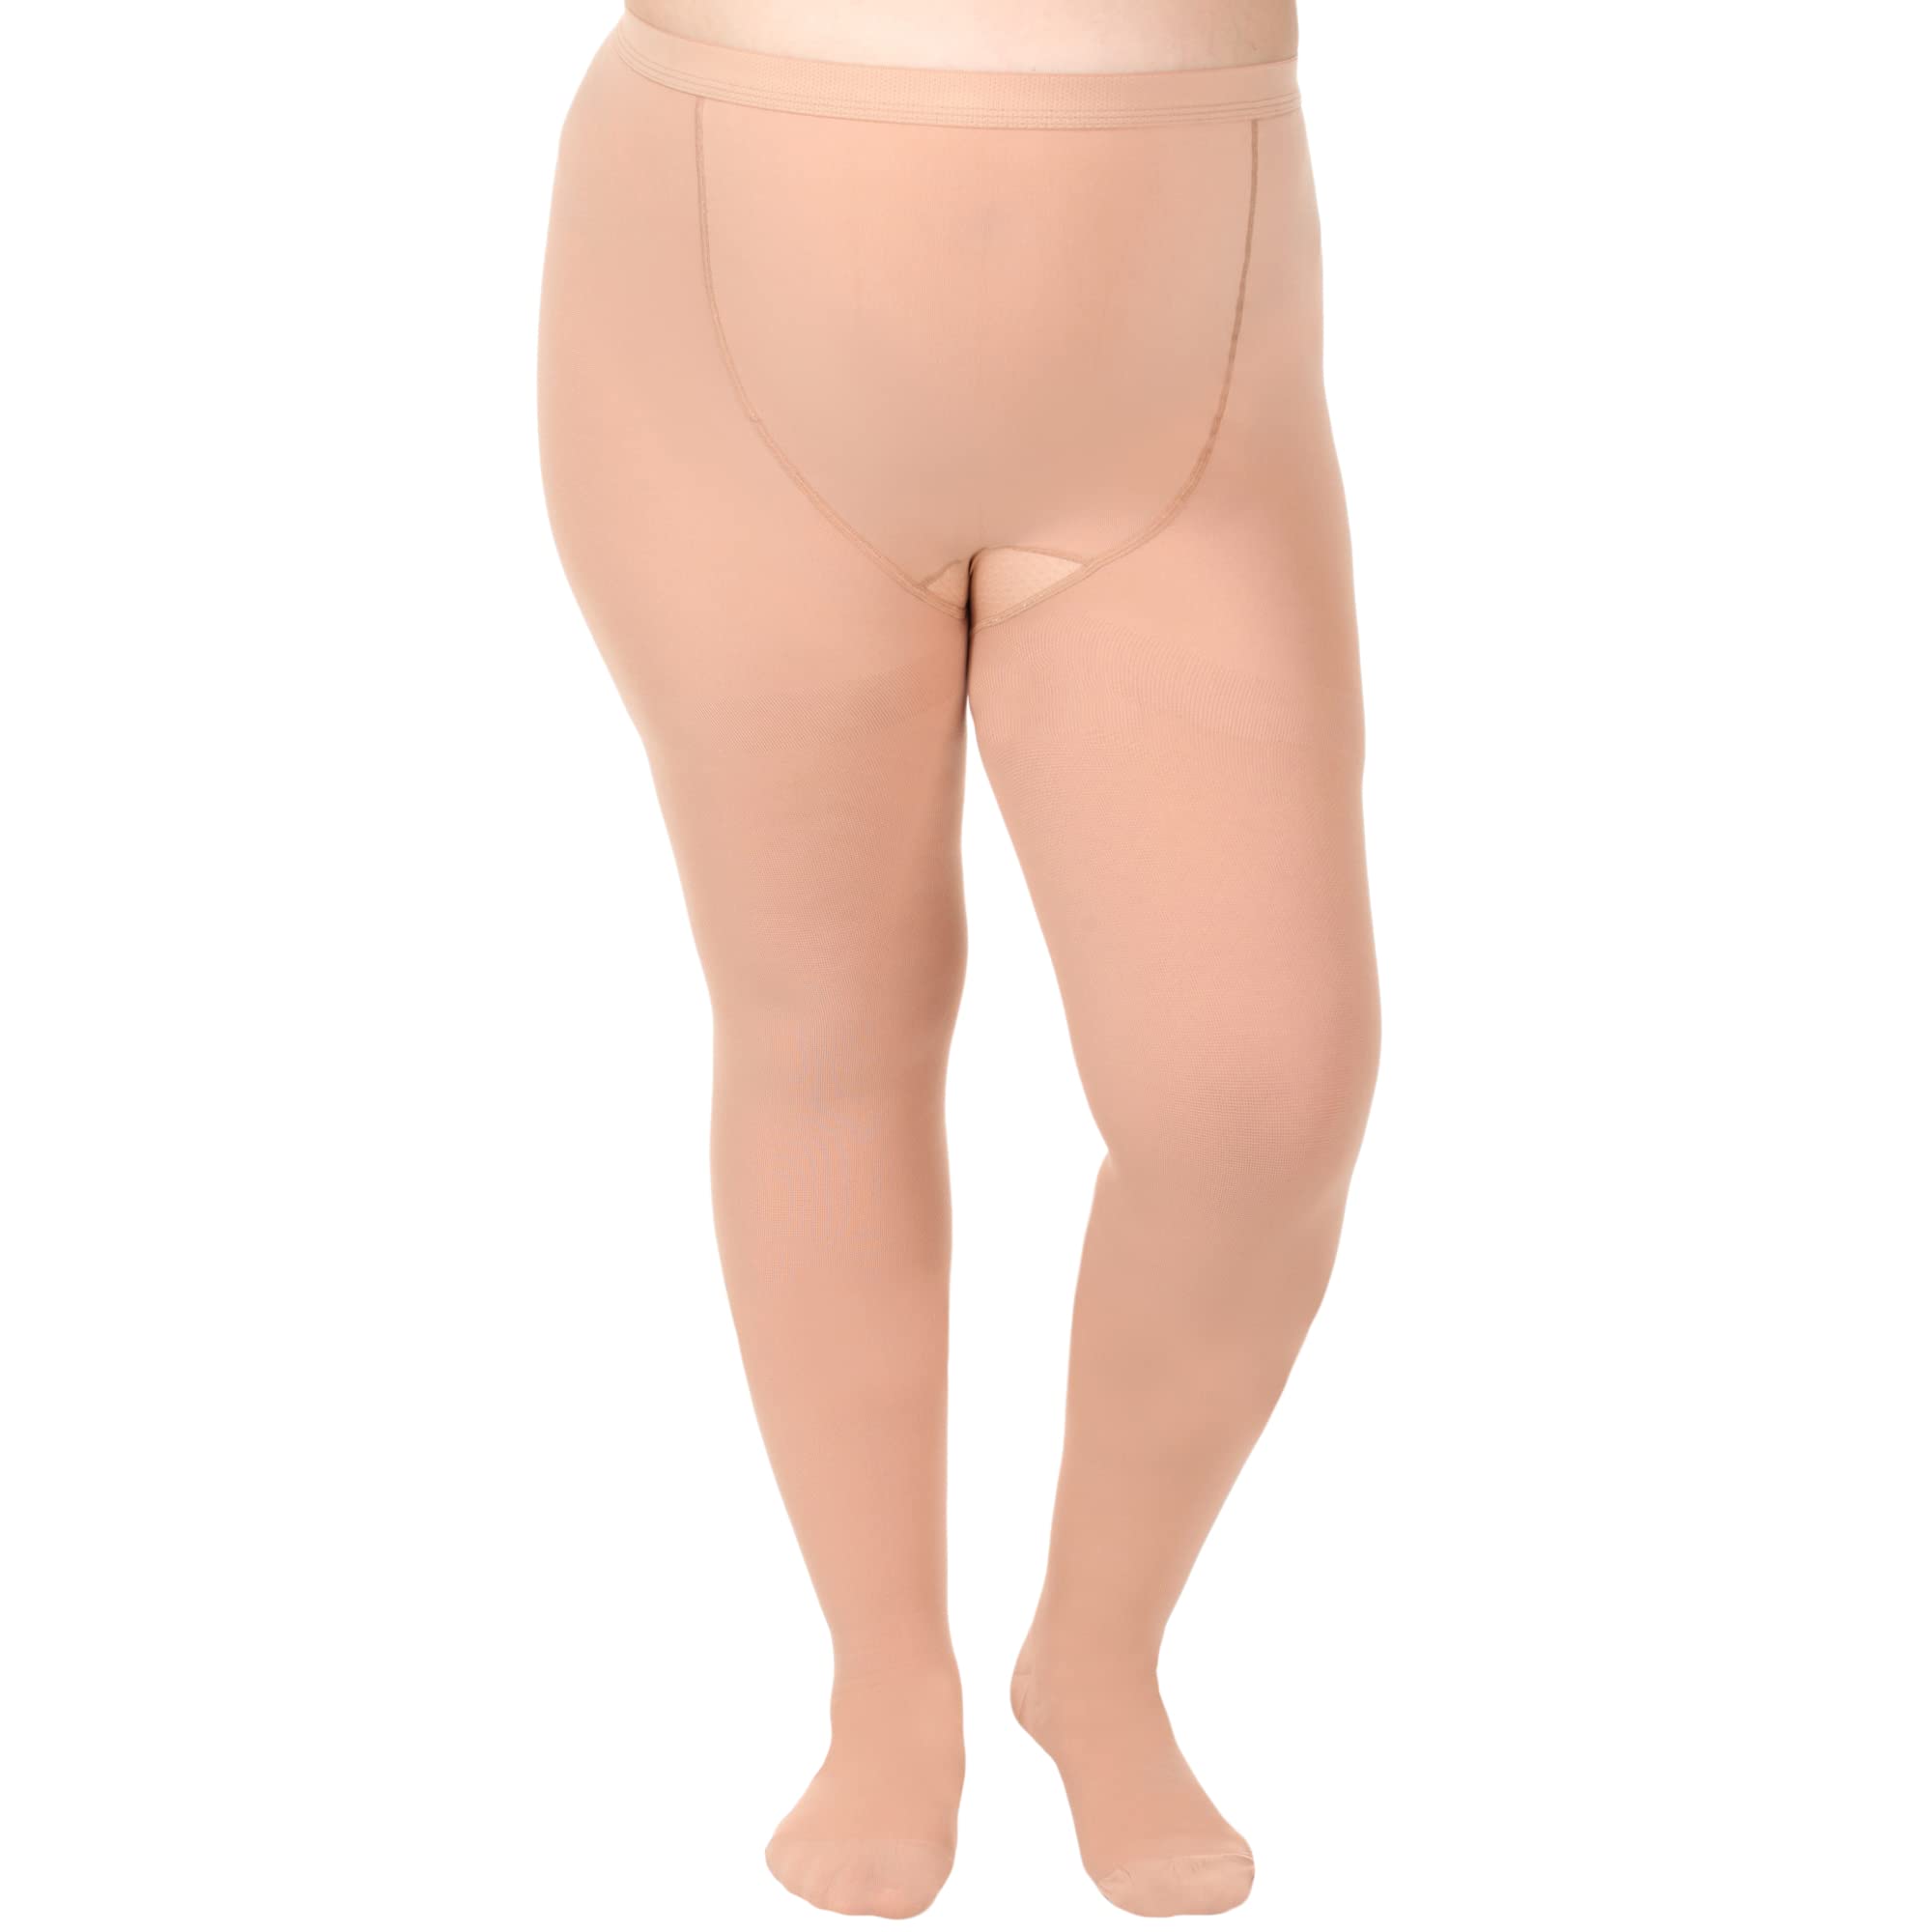 Absolute Support - Opaque Maternity Compression Stockings